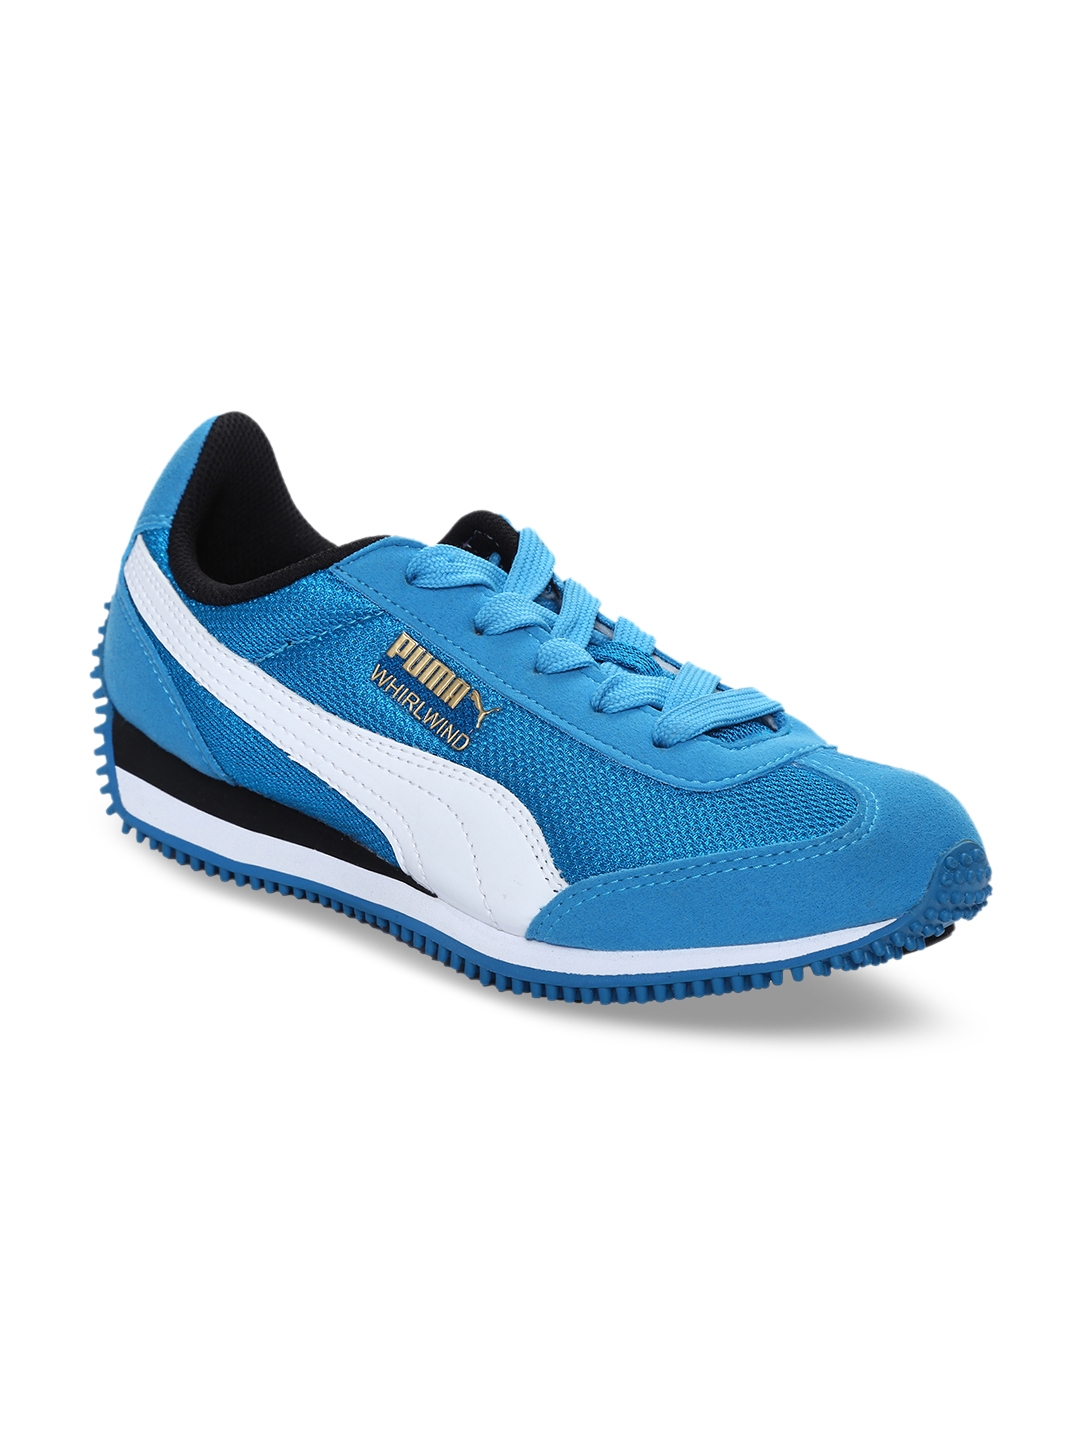 Buy Puma Unisex Whirlwind Jr DP Blue Sneakers - Casual Shoes for Unisex ...